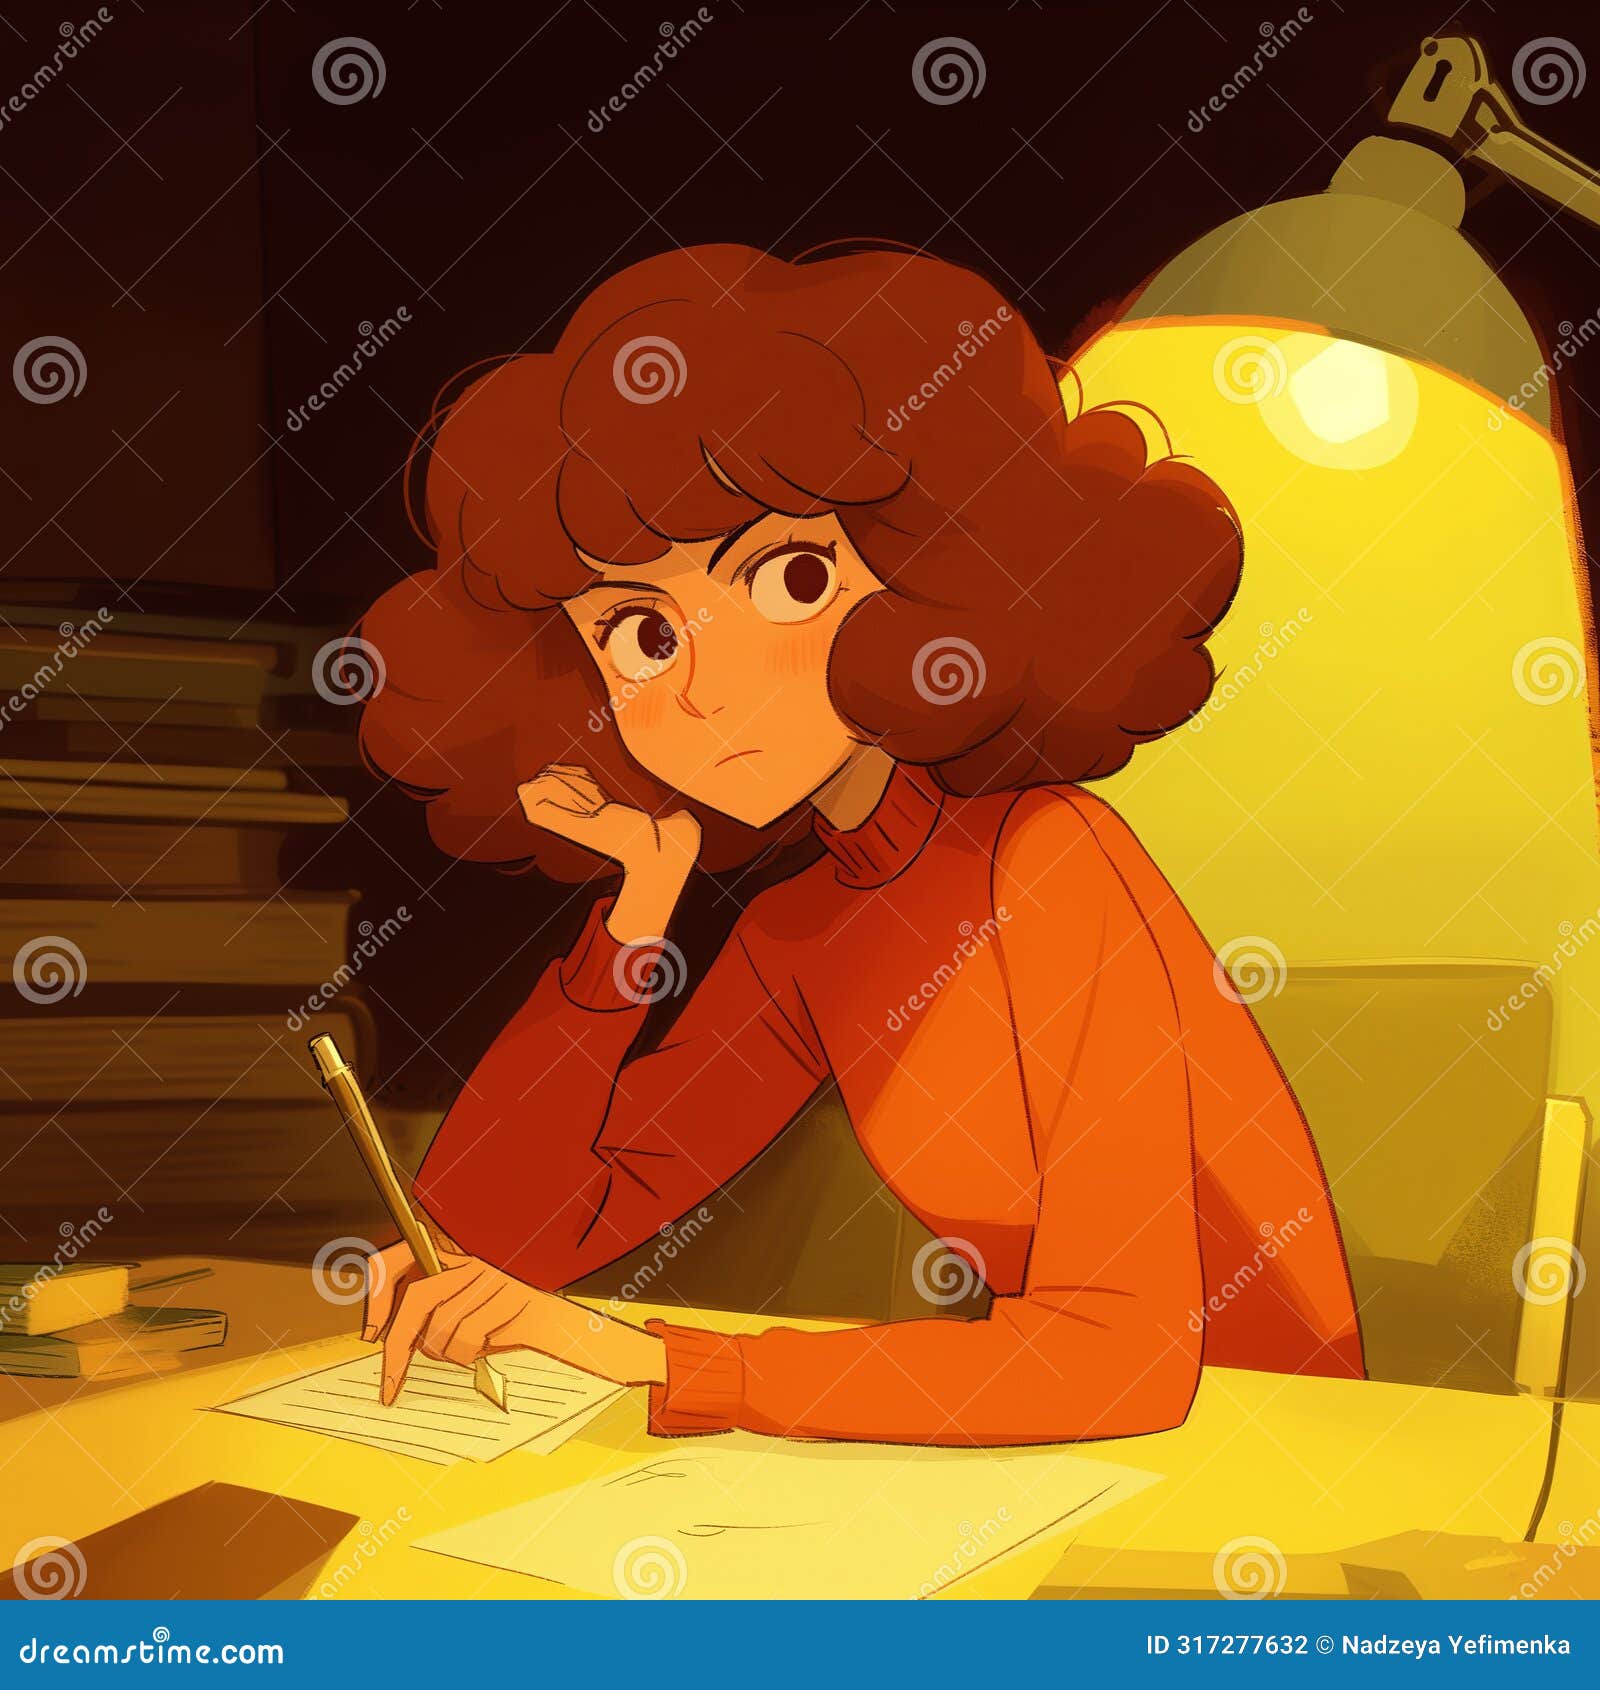 animated young woman curly hair focused on writing warmly lit room books